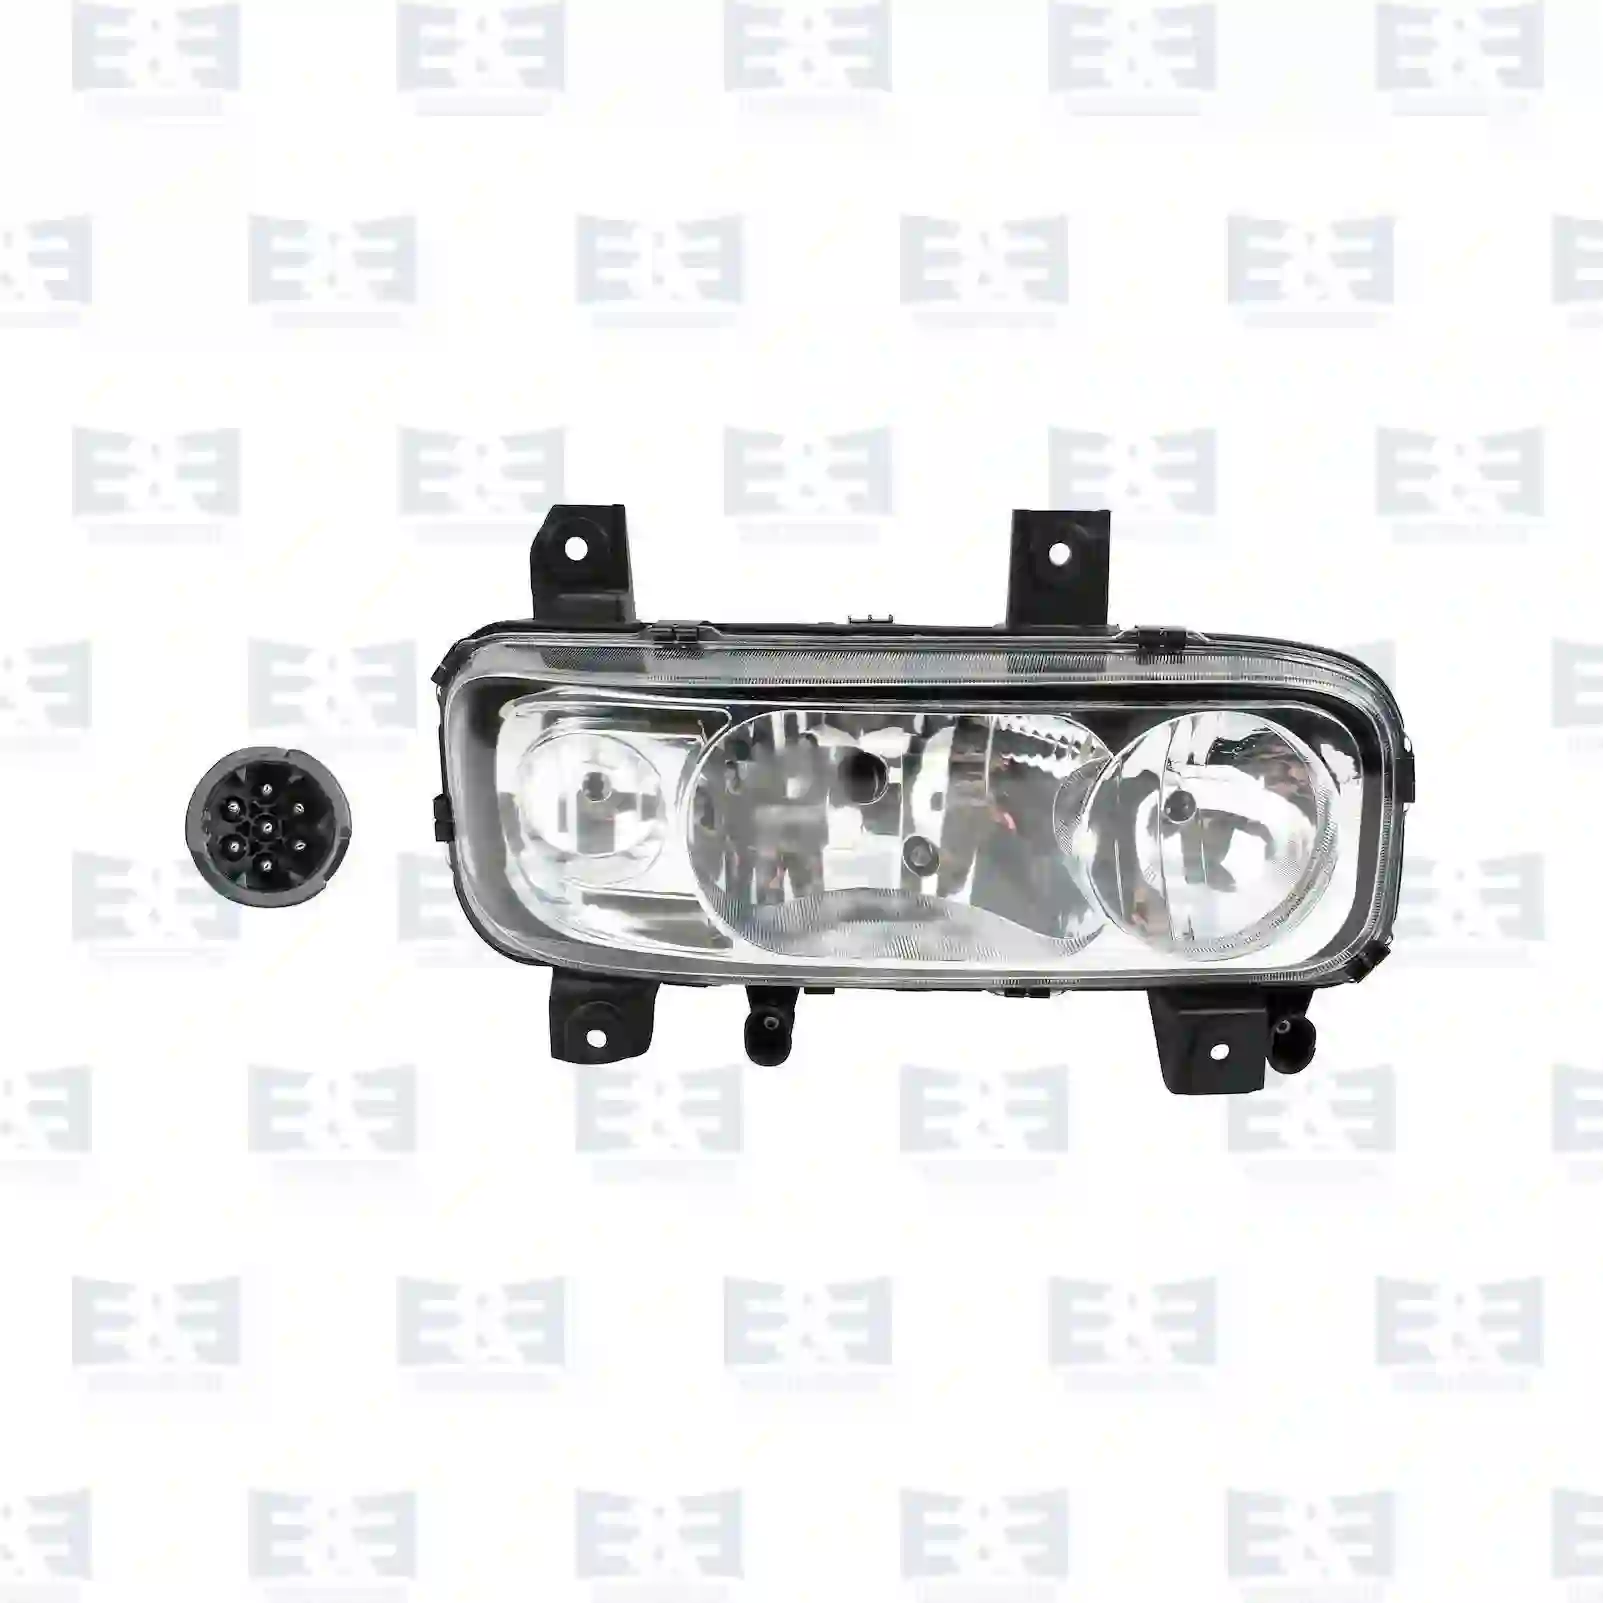 Headlamp, right, with fog lamp, without adjusting motor, 2E2299245, 6868200161, 9738202761, , , ||  2E2299245 E&E Truck Spare Parts | Truck Spare Parts, Auotomotive Spare Parts Headlamp, right, with fog lamp, without adjusting motor, 2E2299245, 6868200161, 9738202761, , , ||  2E2299245 E&E Truck Spare Parts | Truck Spare Parts, Auotomotive Spare Parts